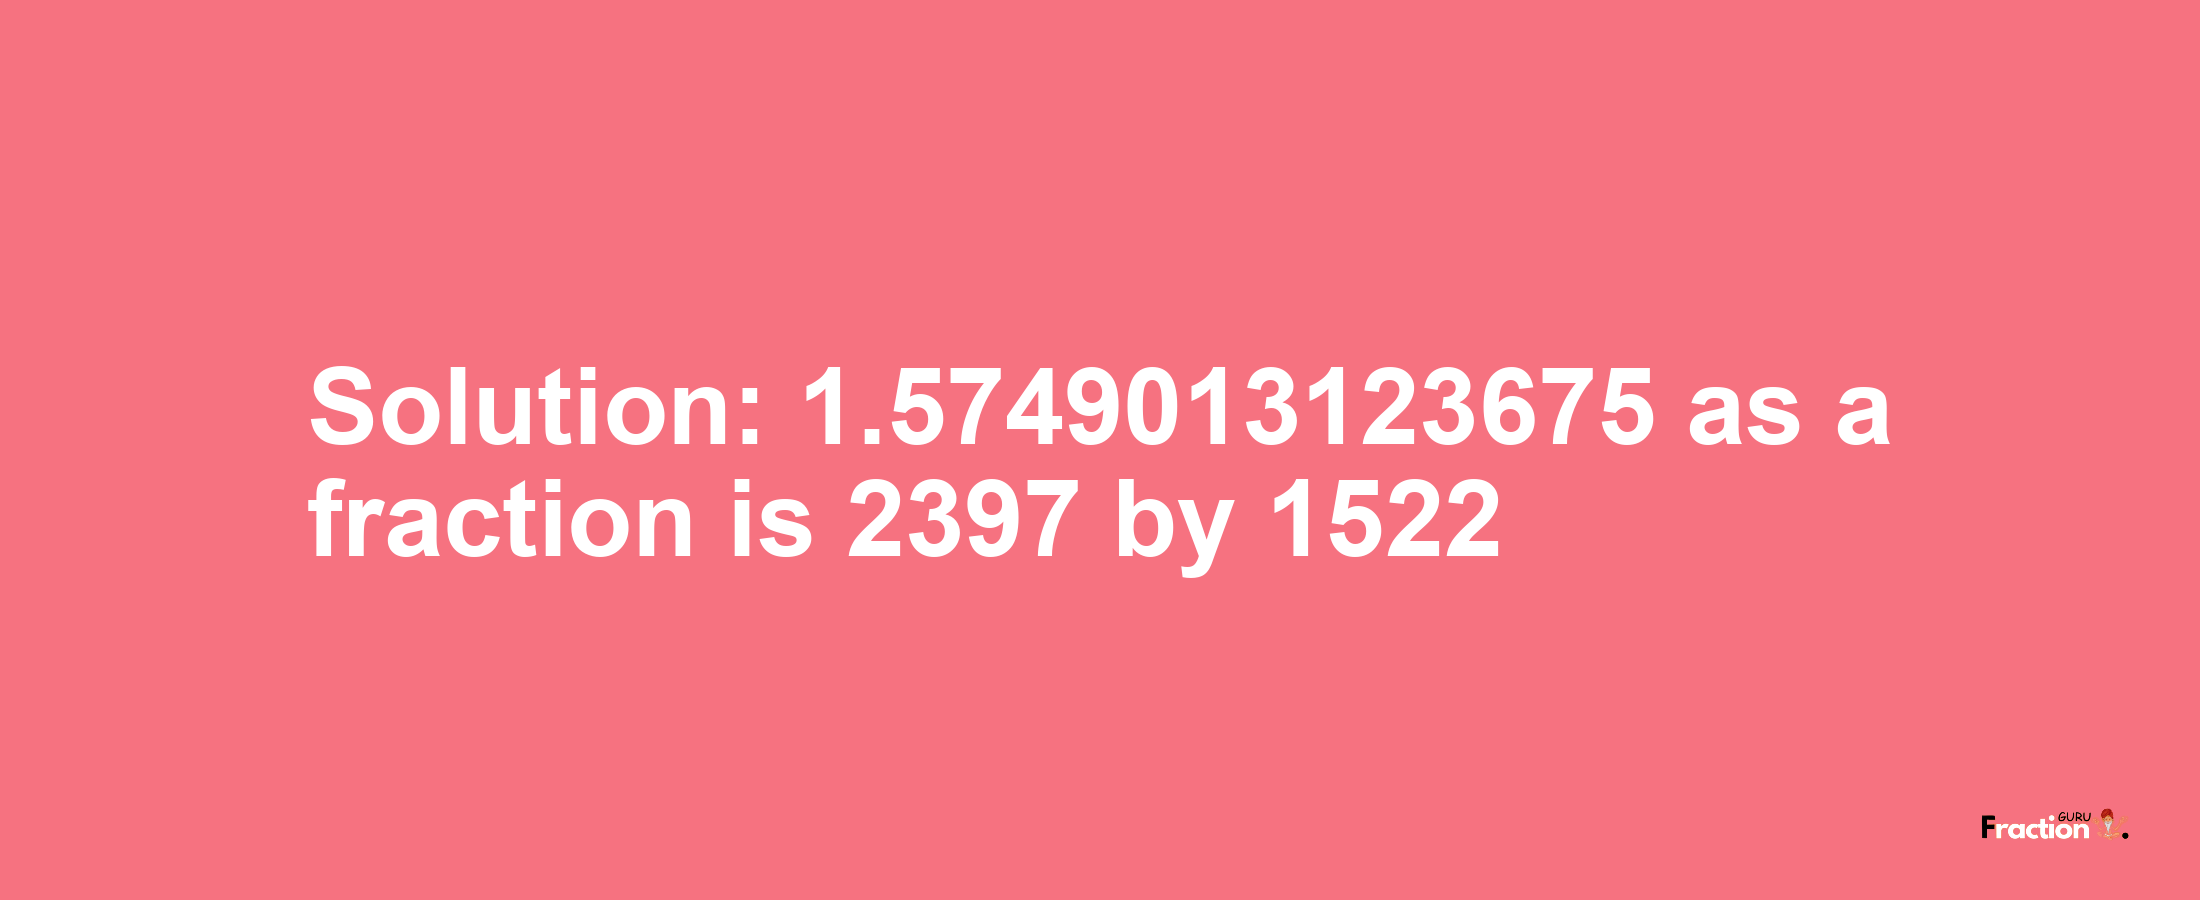 Solution:1.5749013123675 as a fraction is 2397/1522